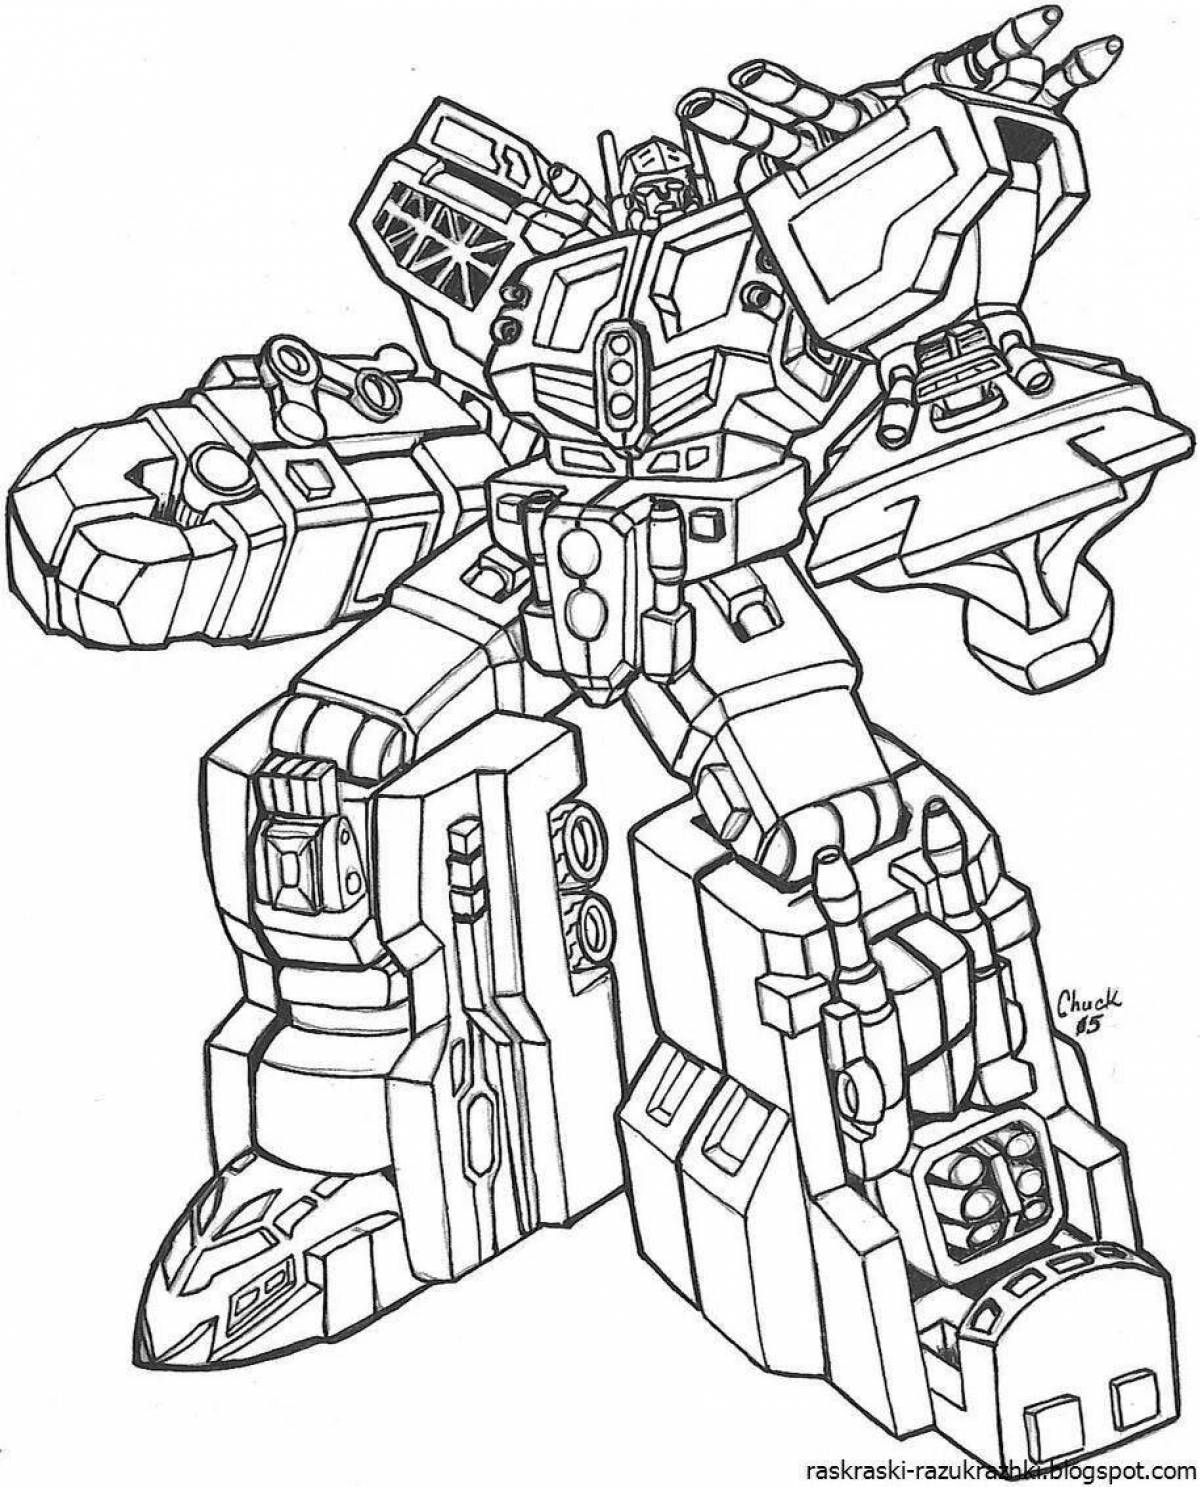 Colorful Transformer Robot Coloring Pages for Boys